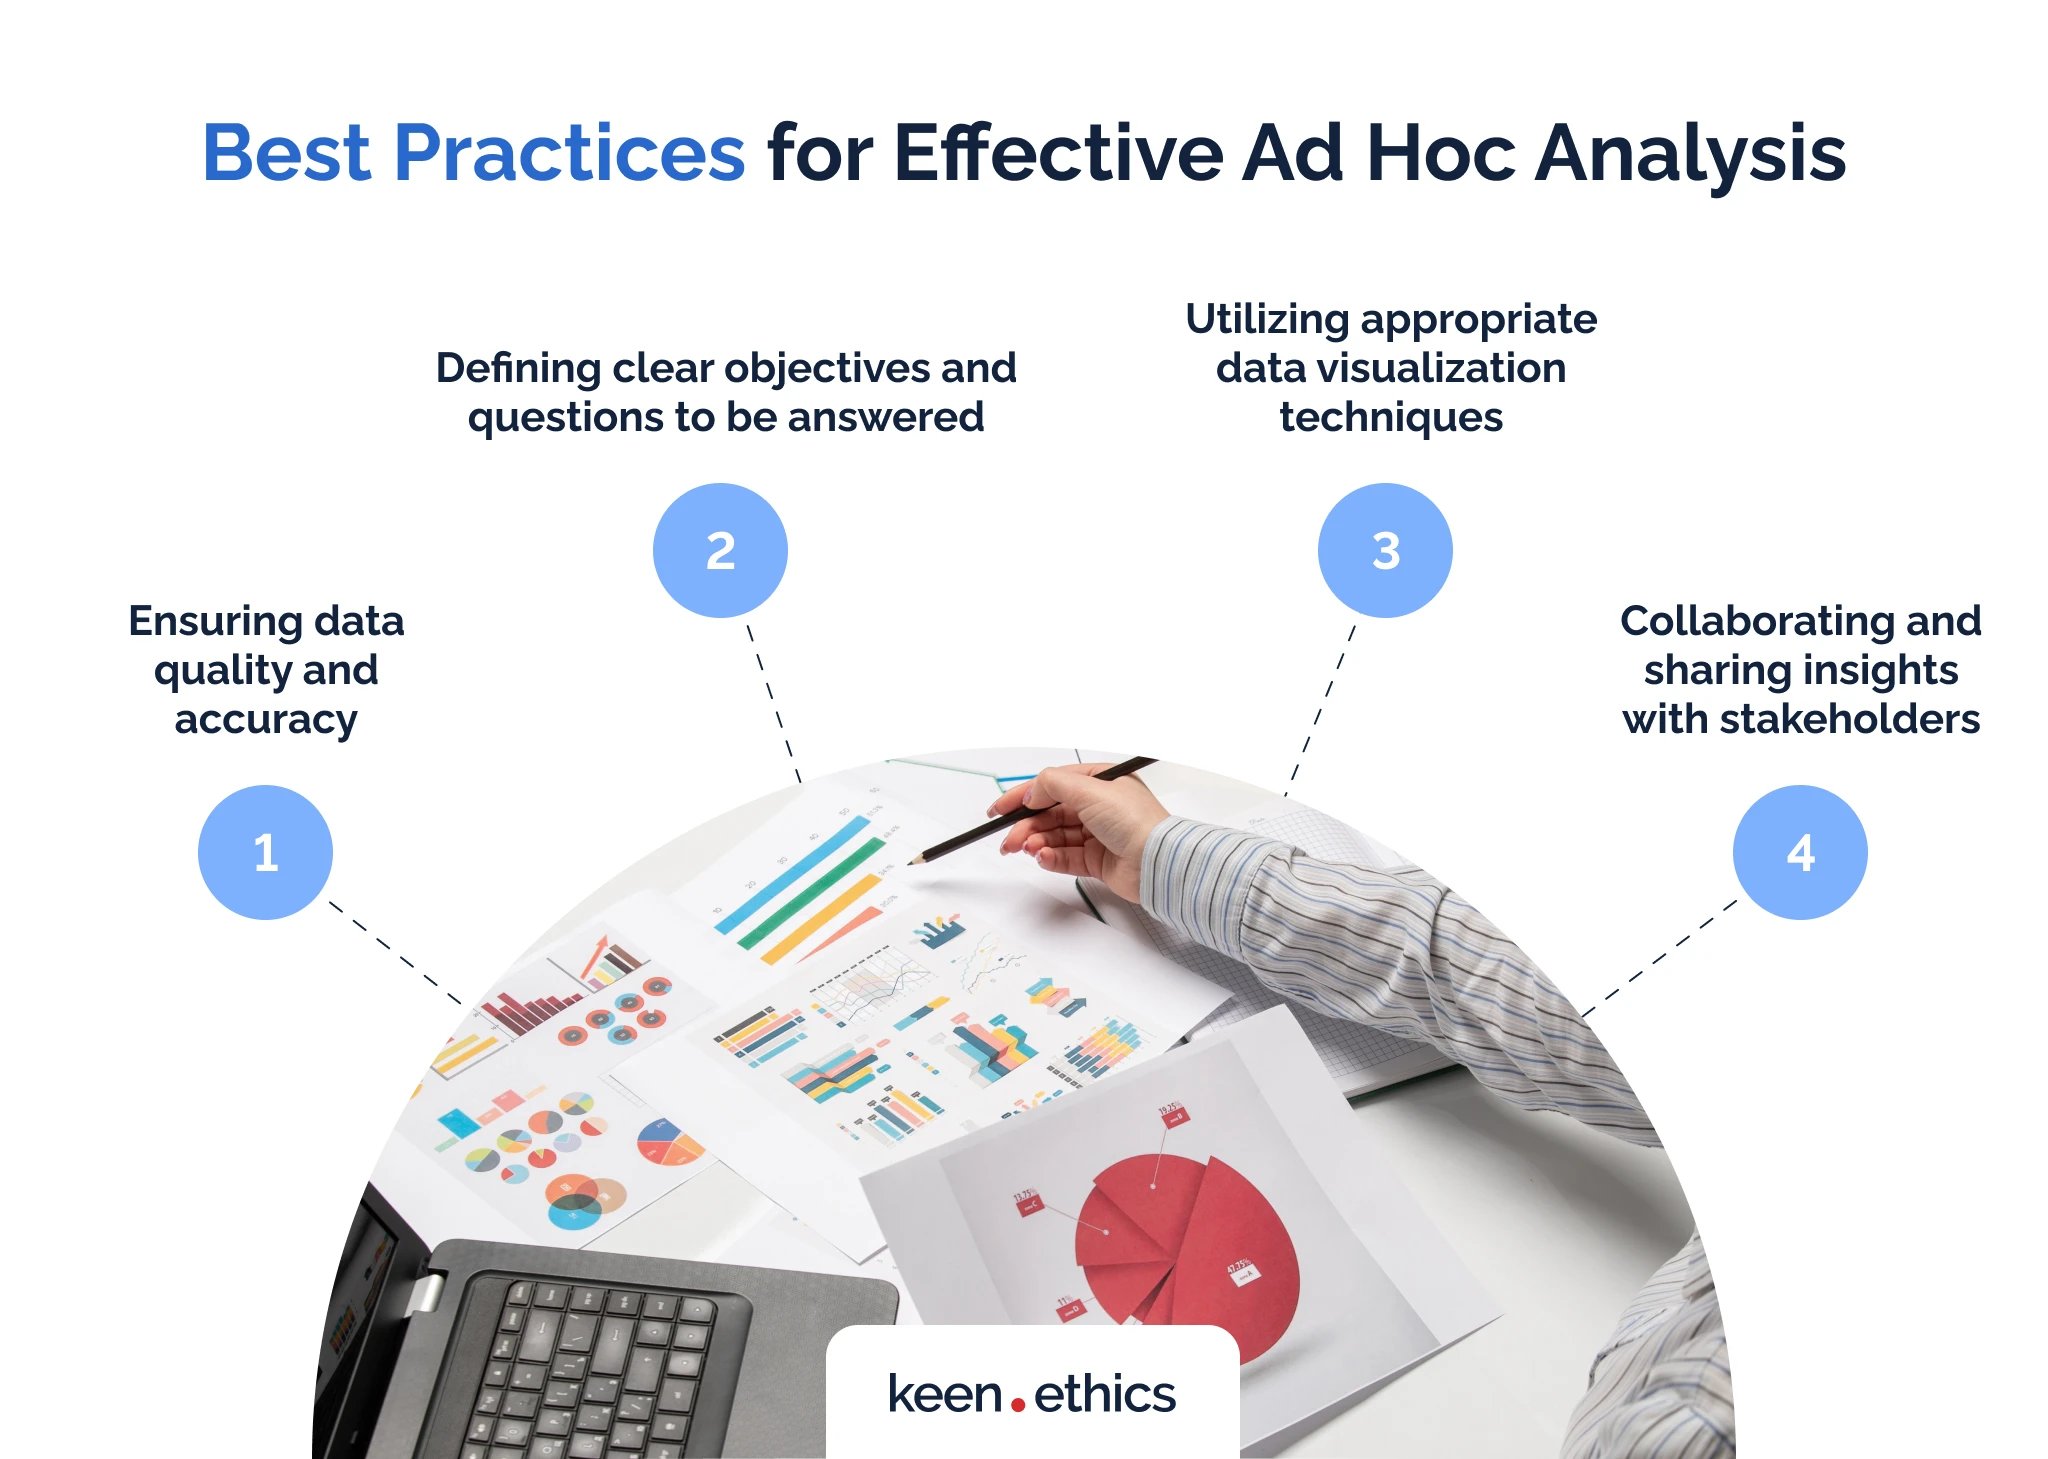 Best practices for effective ad hoc analysis